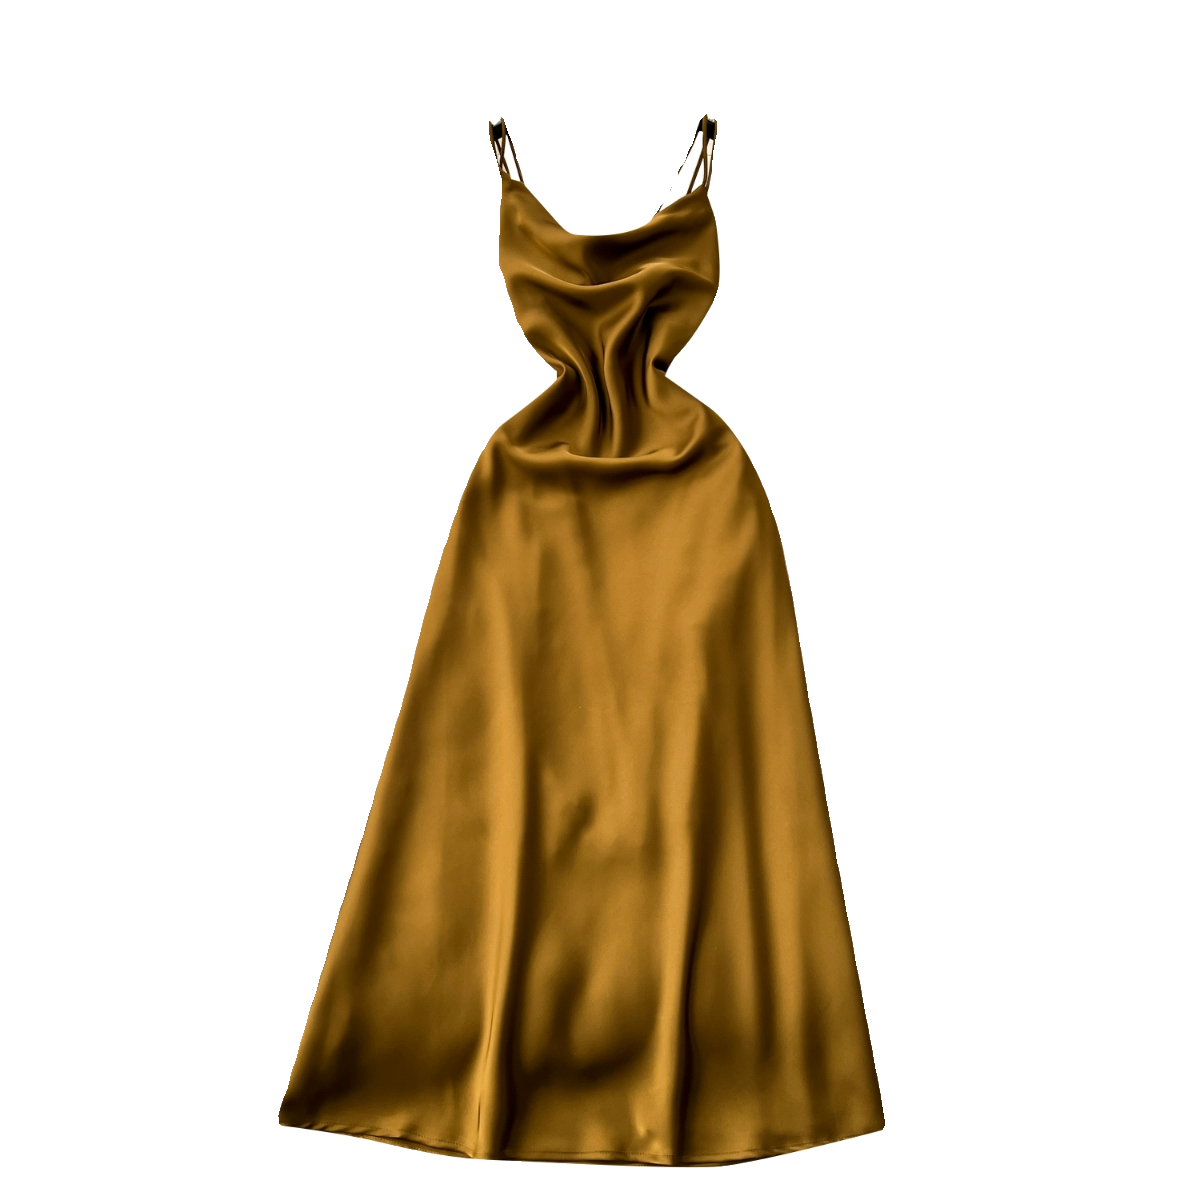 Satin French Style Camisole Dress